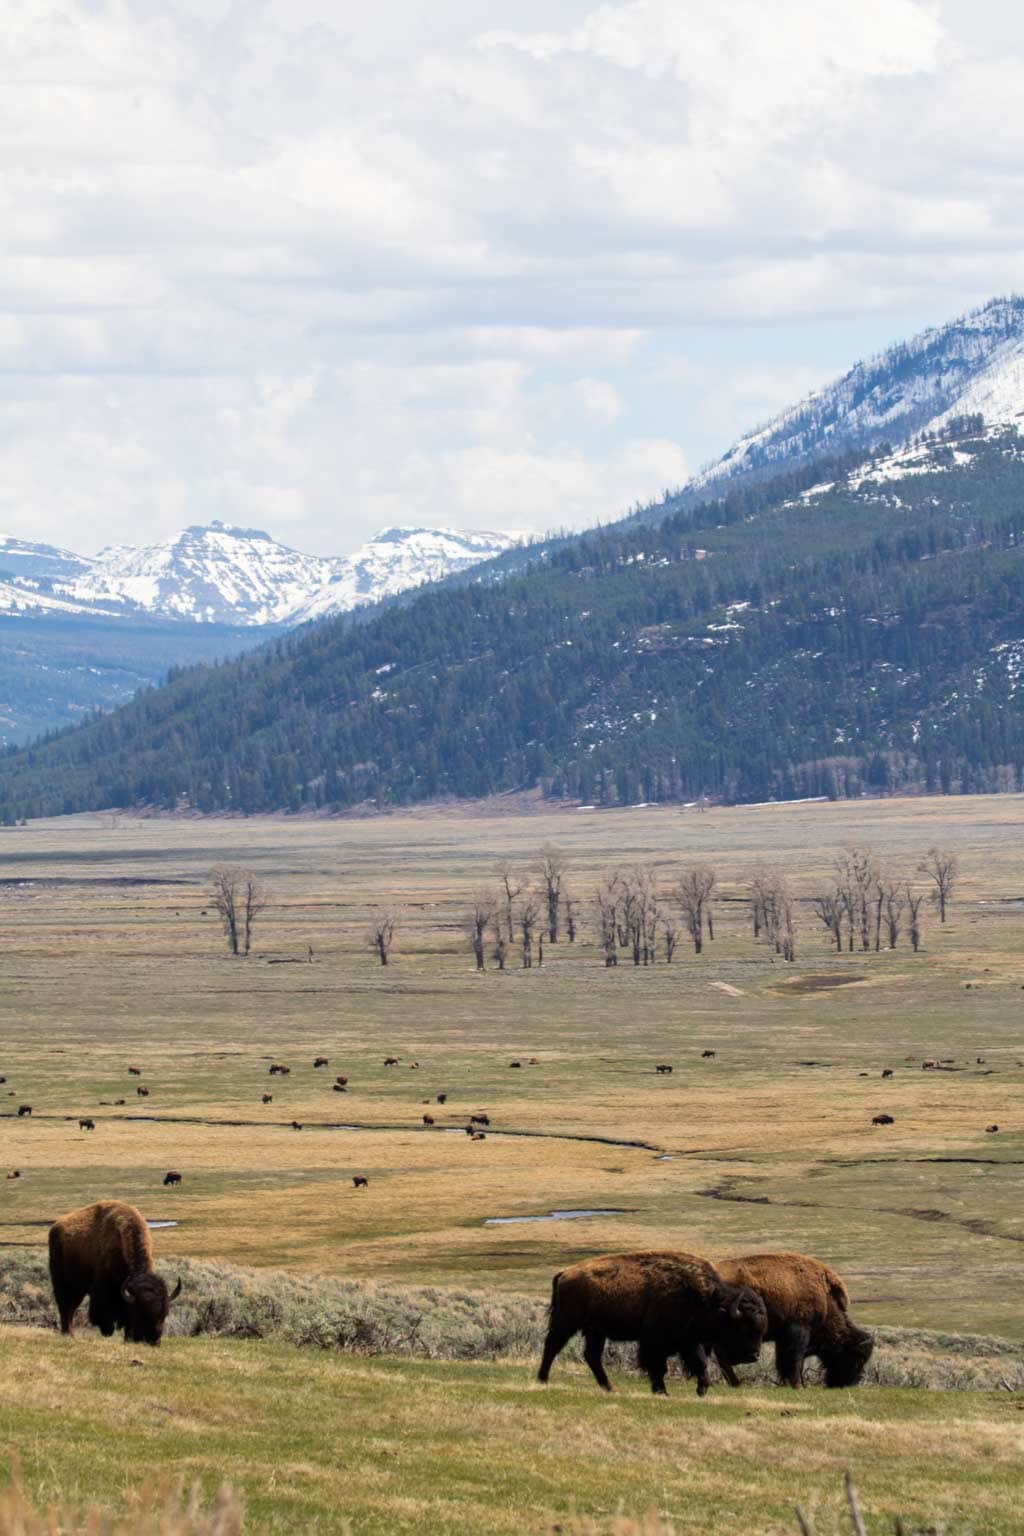 Fun facts about national parks: Yellowstone National Park is the only place in America where bison have lived continuously since prehistoric times.